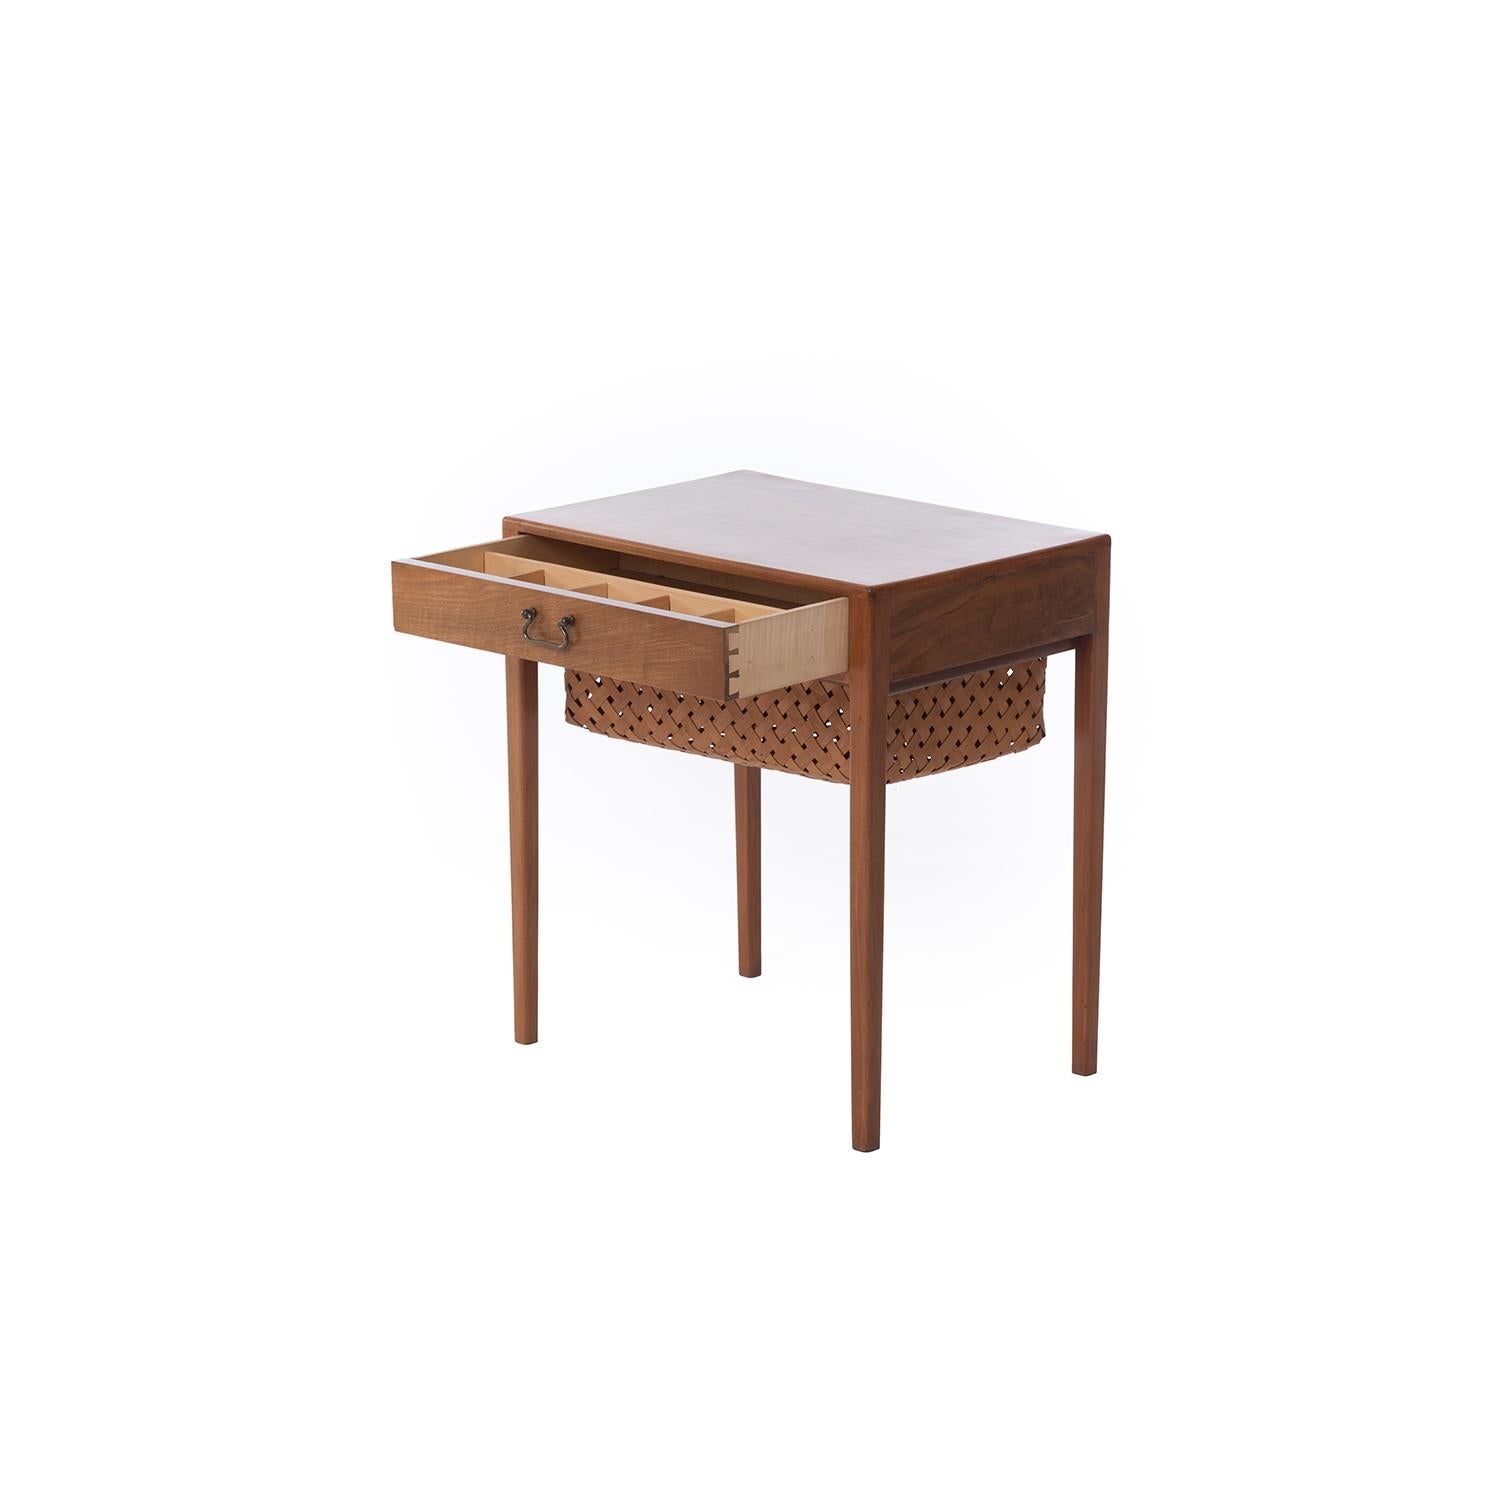 20th Century Transitional Scandinavian Modern Mahogany Sewing Table with Drawer and Basket